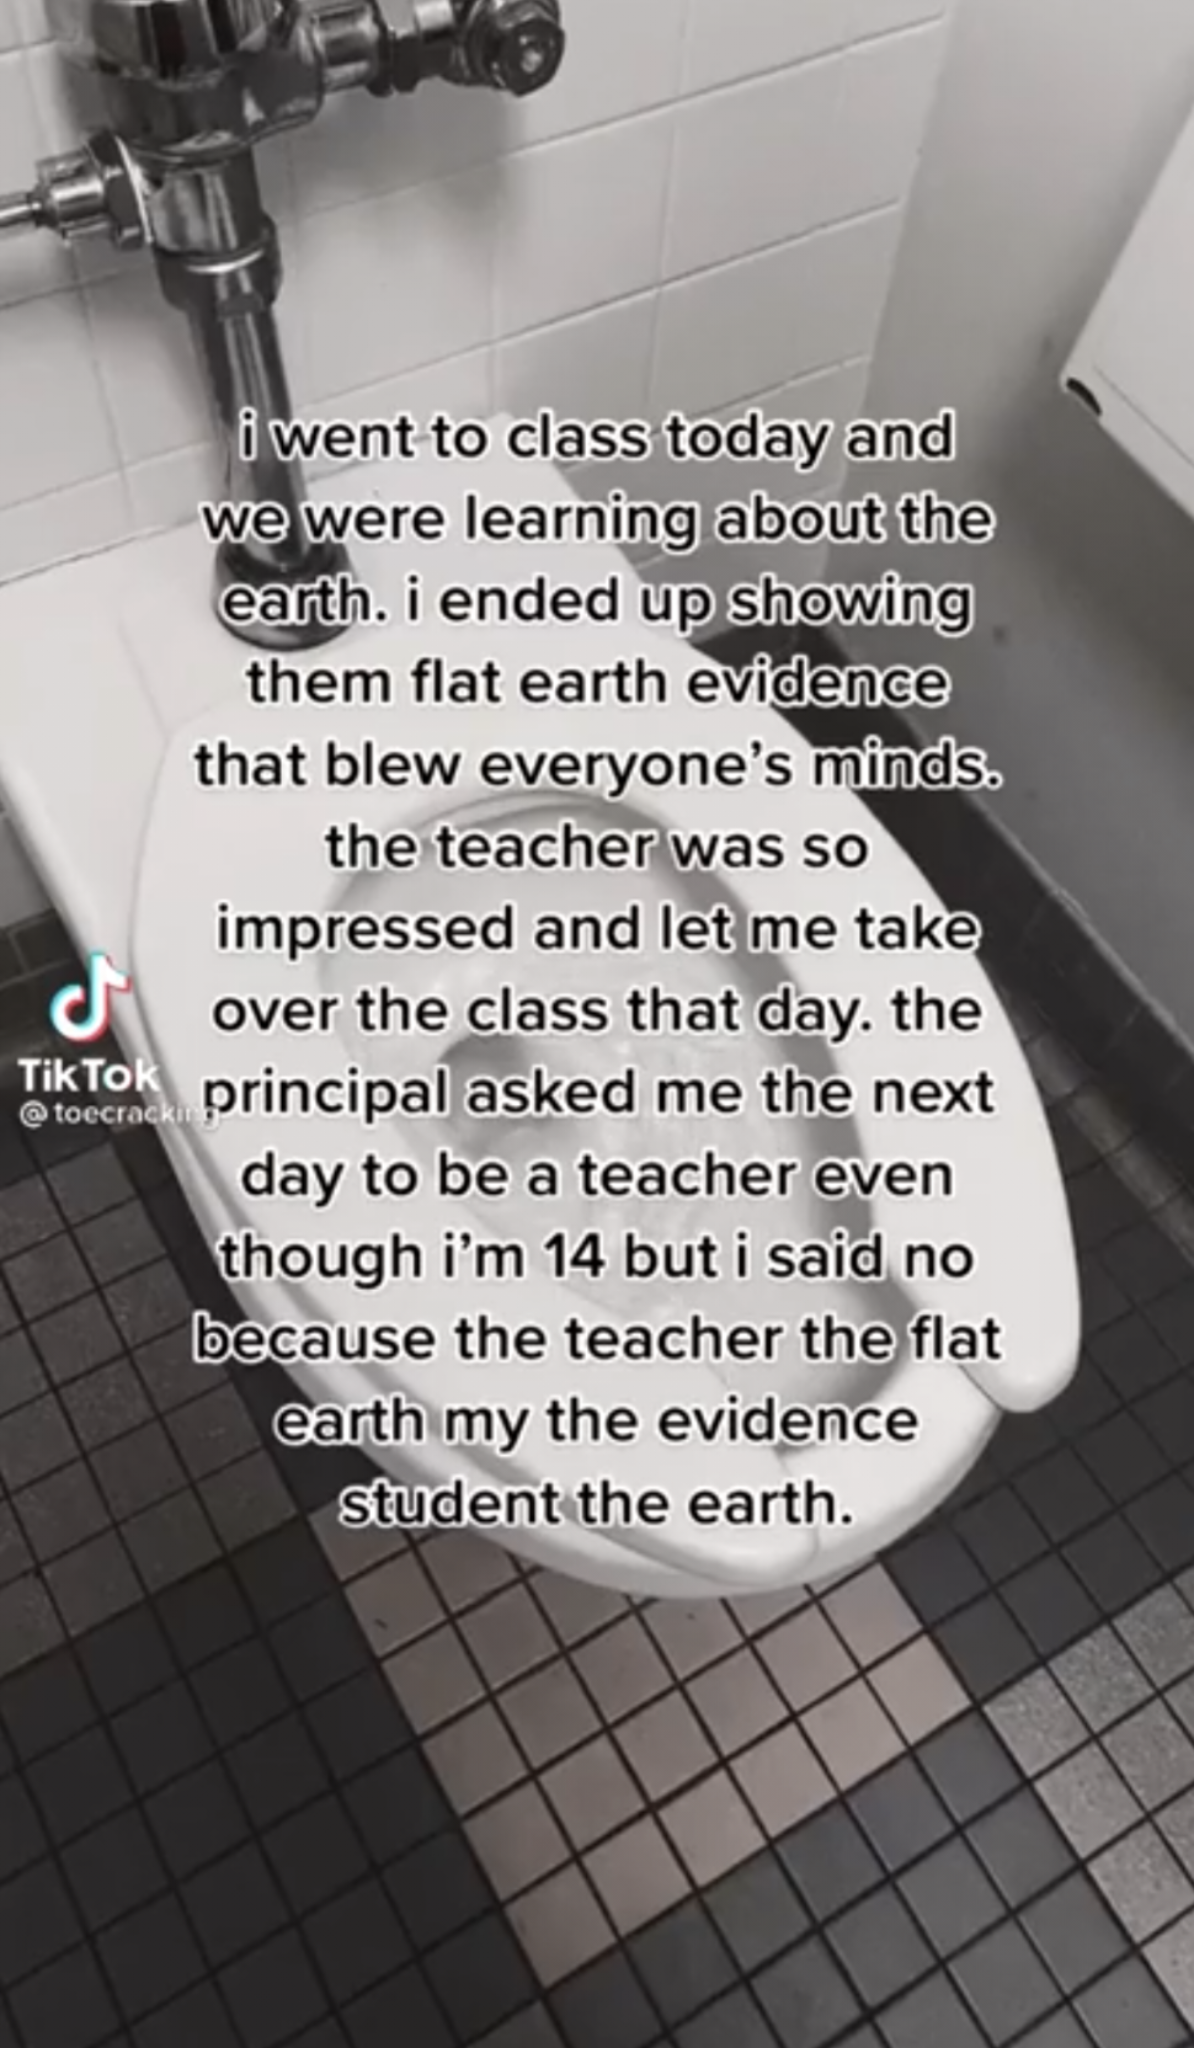 cringeworthy pics - monochrome photography - i went to class today and we were learning about the earth. i ended up showing them flat earth evidence that blew everyone's minds. the teacher was so impressed and let me take d over the class that day, the Ti